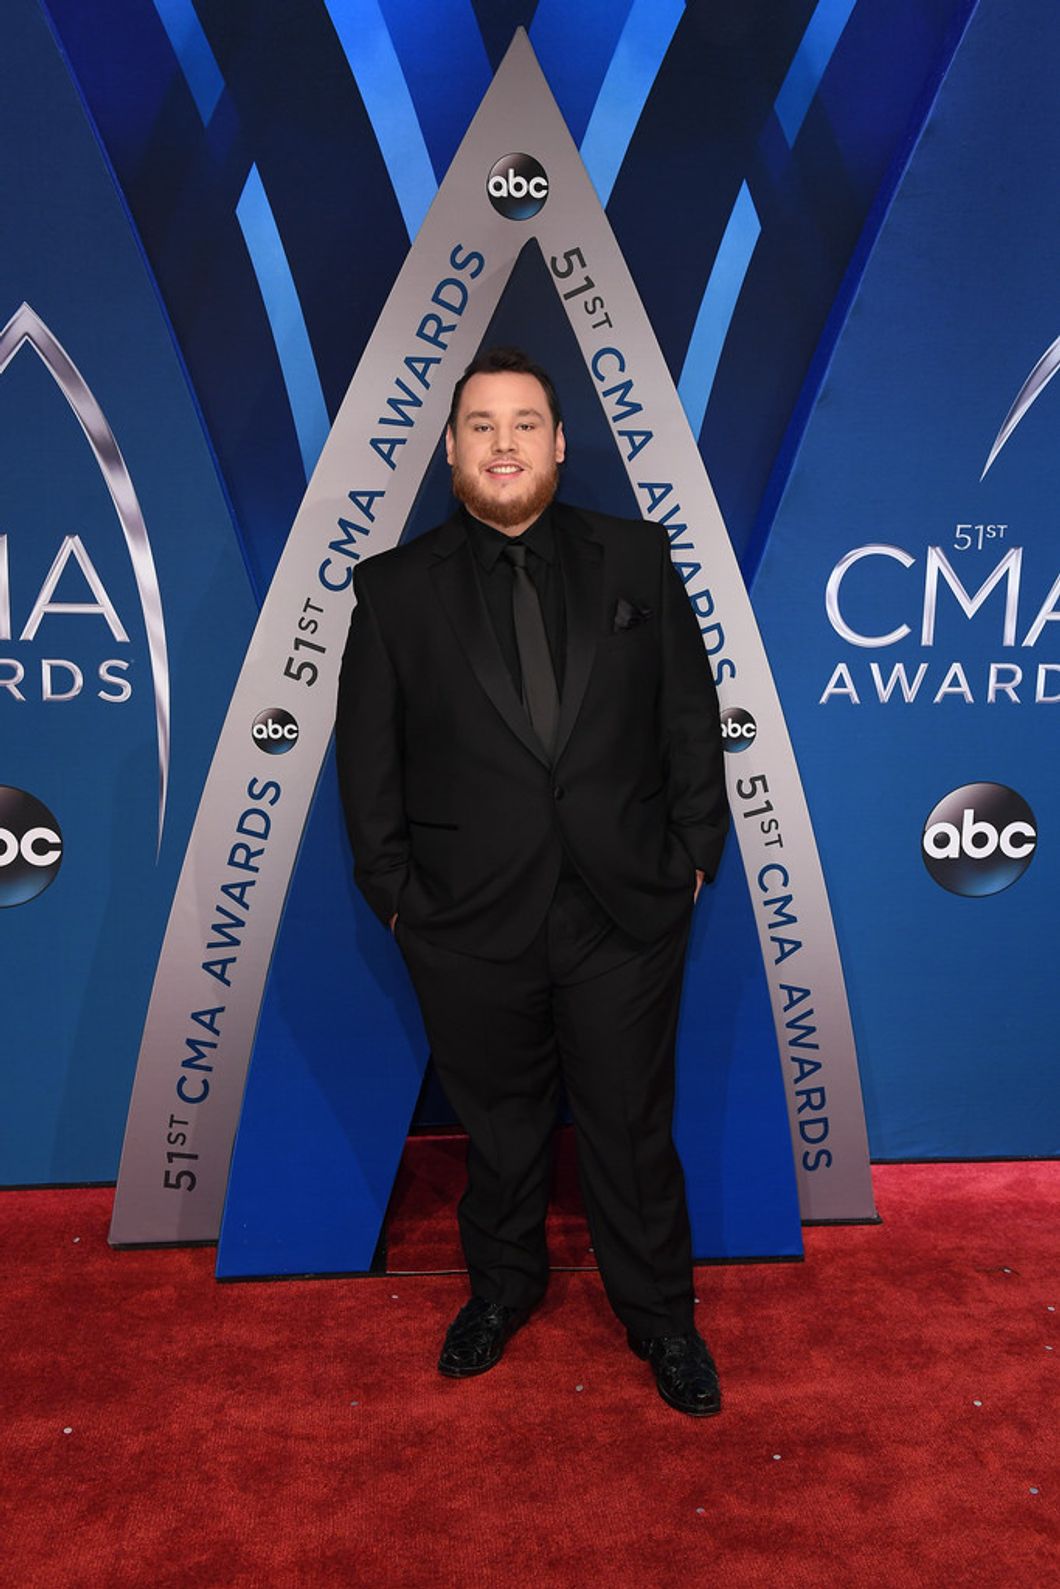 5 Reasons Luke Combs Should Drop LC2 Right Now